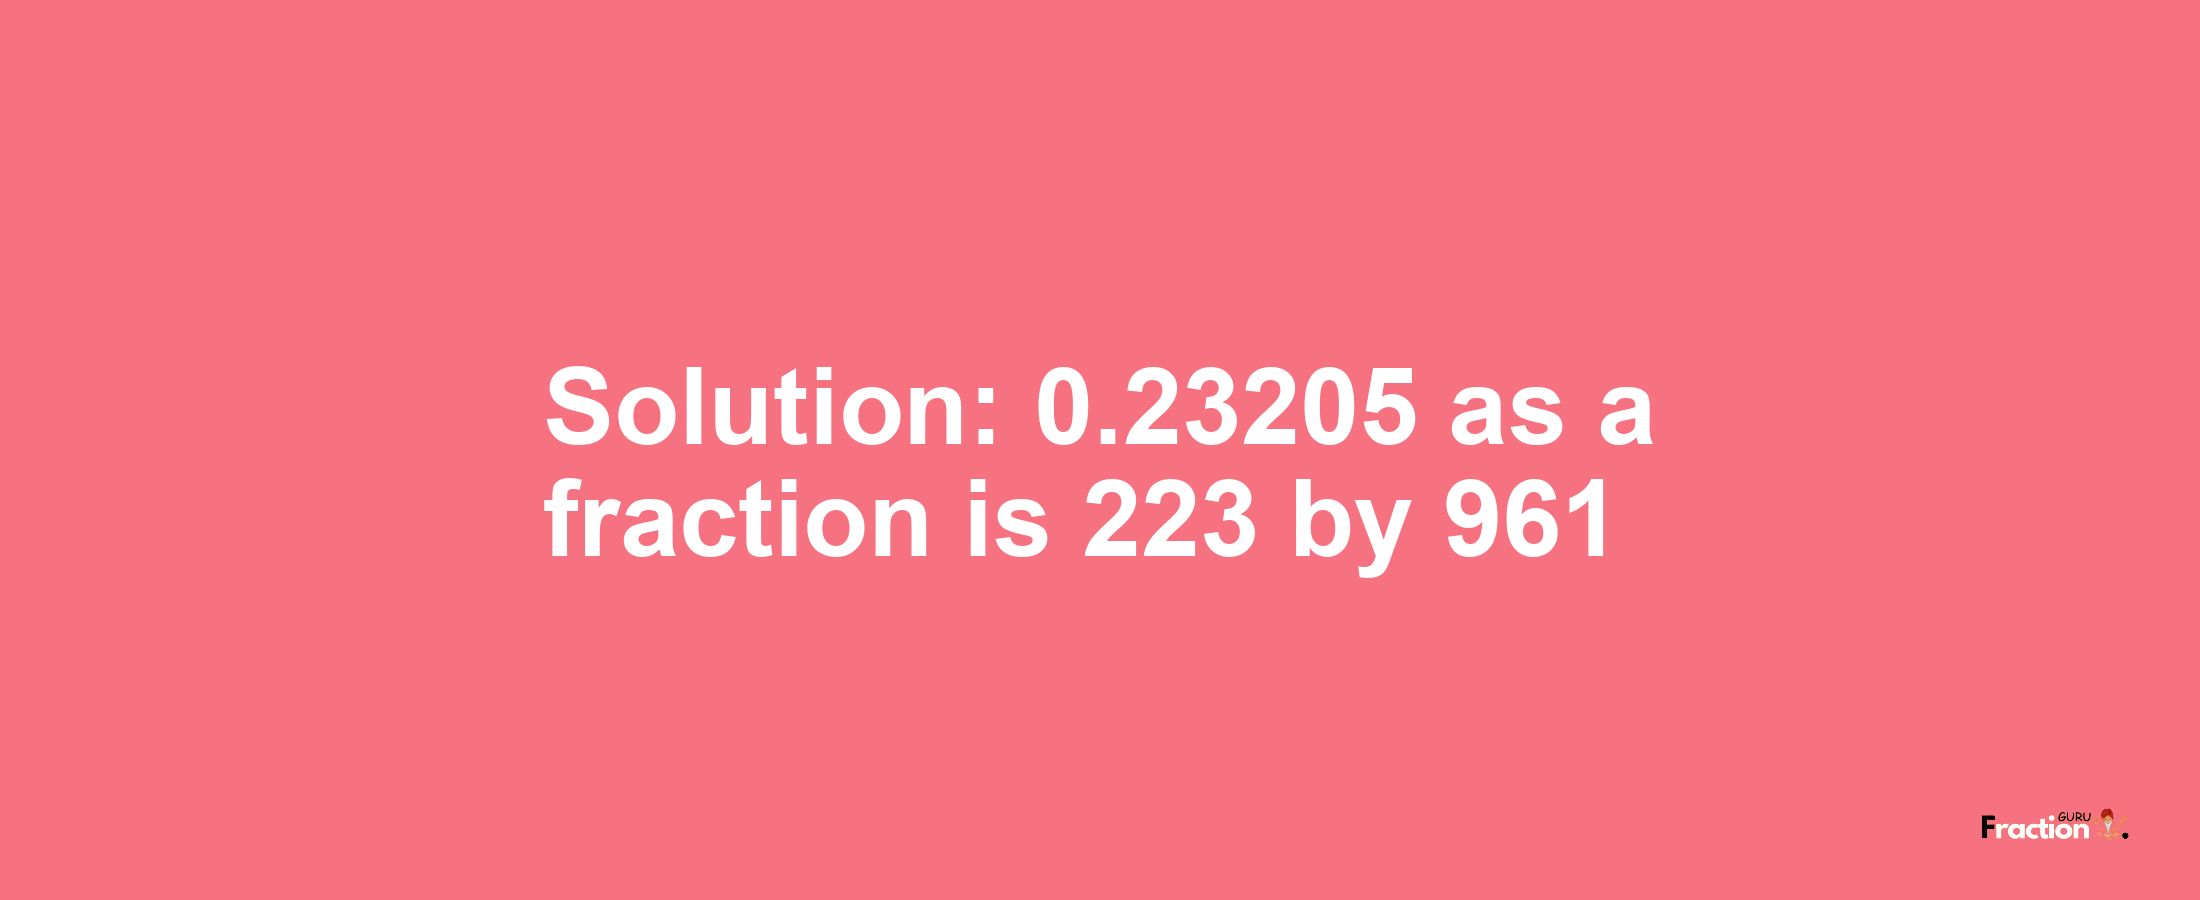 Solution:0.23205 as a fraction is 223/961